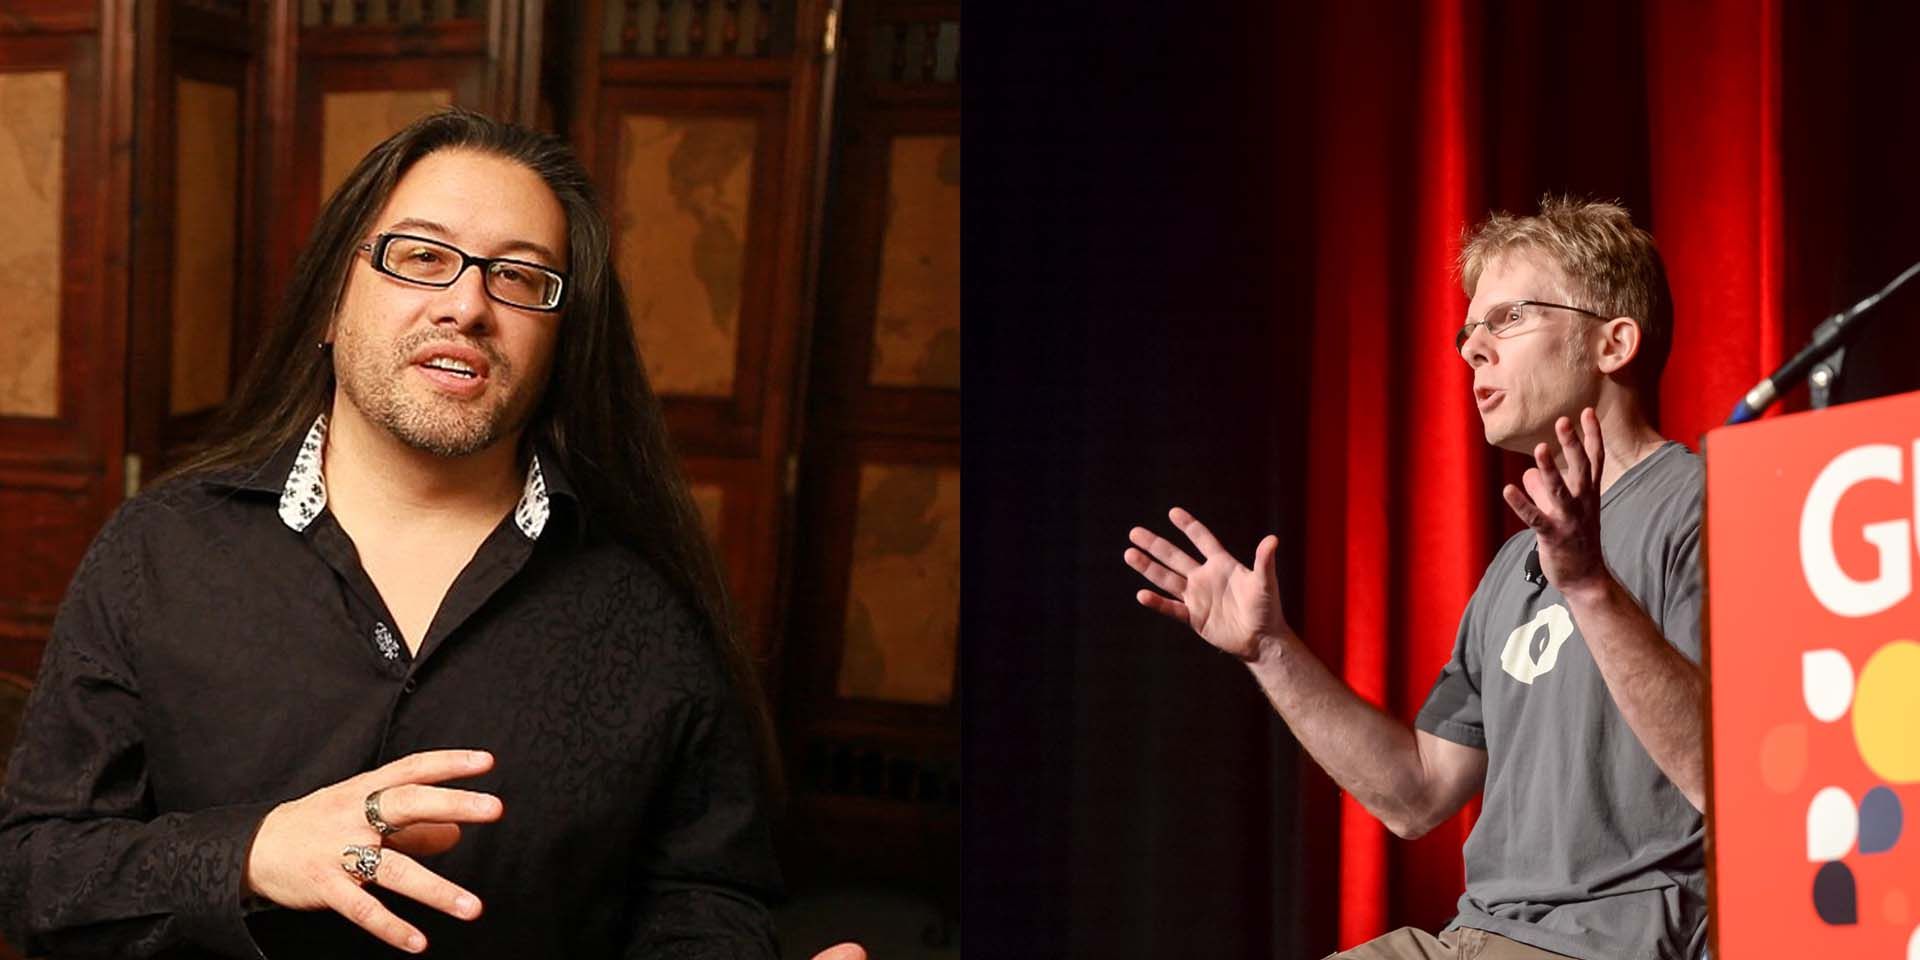 Images of John Romero and John Carmack speaking about their work.